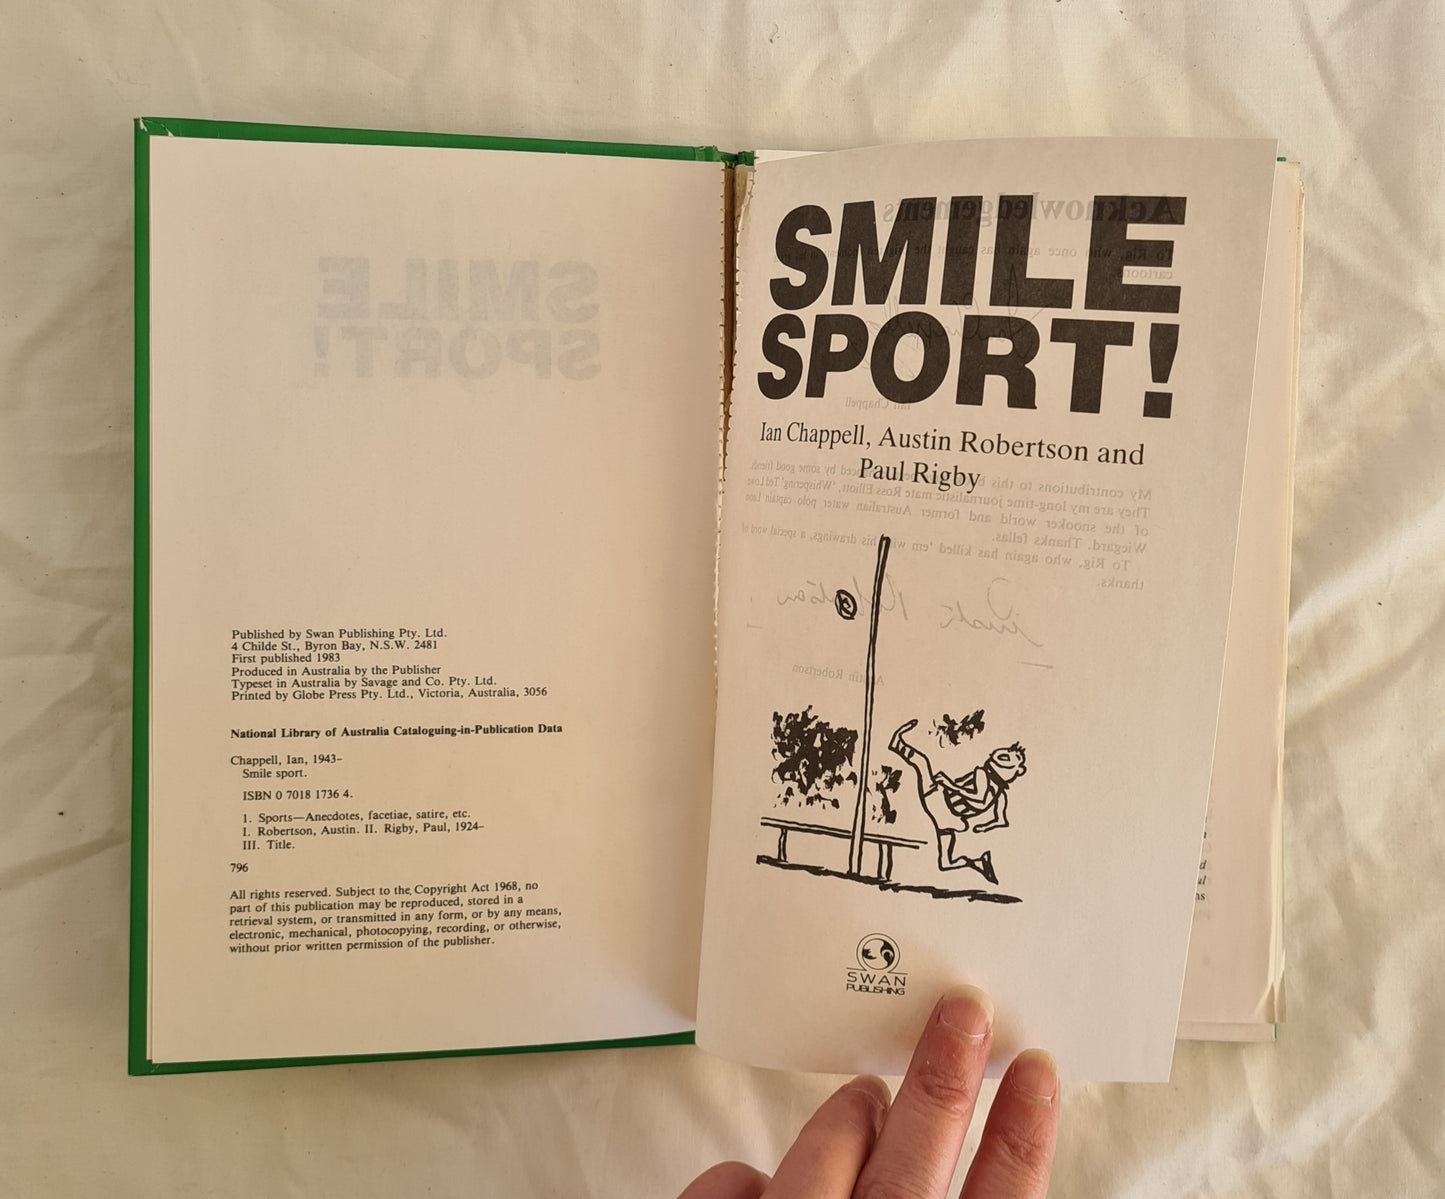 Smile Sport! By Ian Chappell, Austin Robertson and Paul Rigby